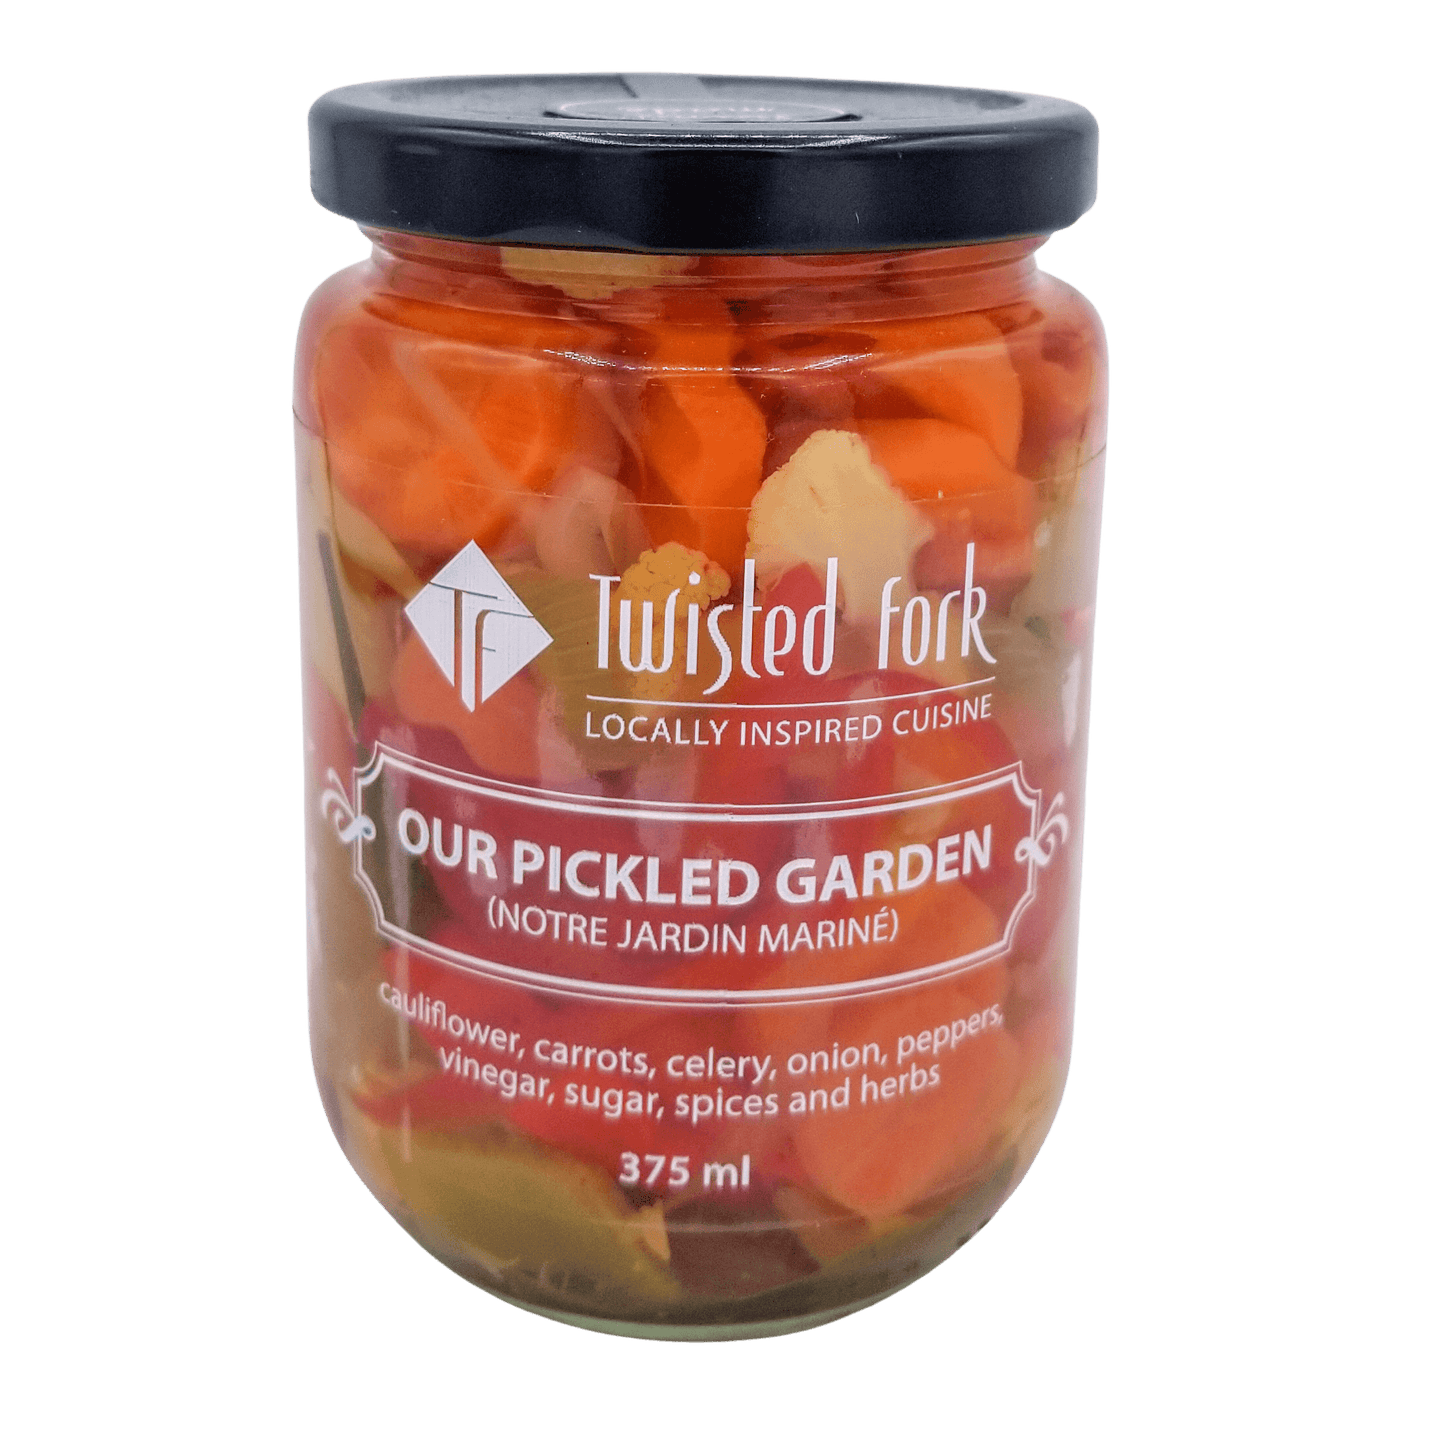 Our Pickled Garden Mixed Pickled Vegetables